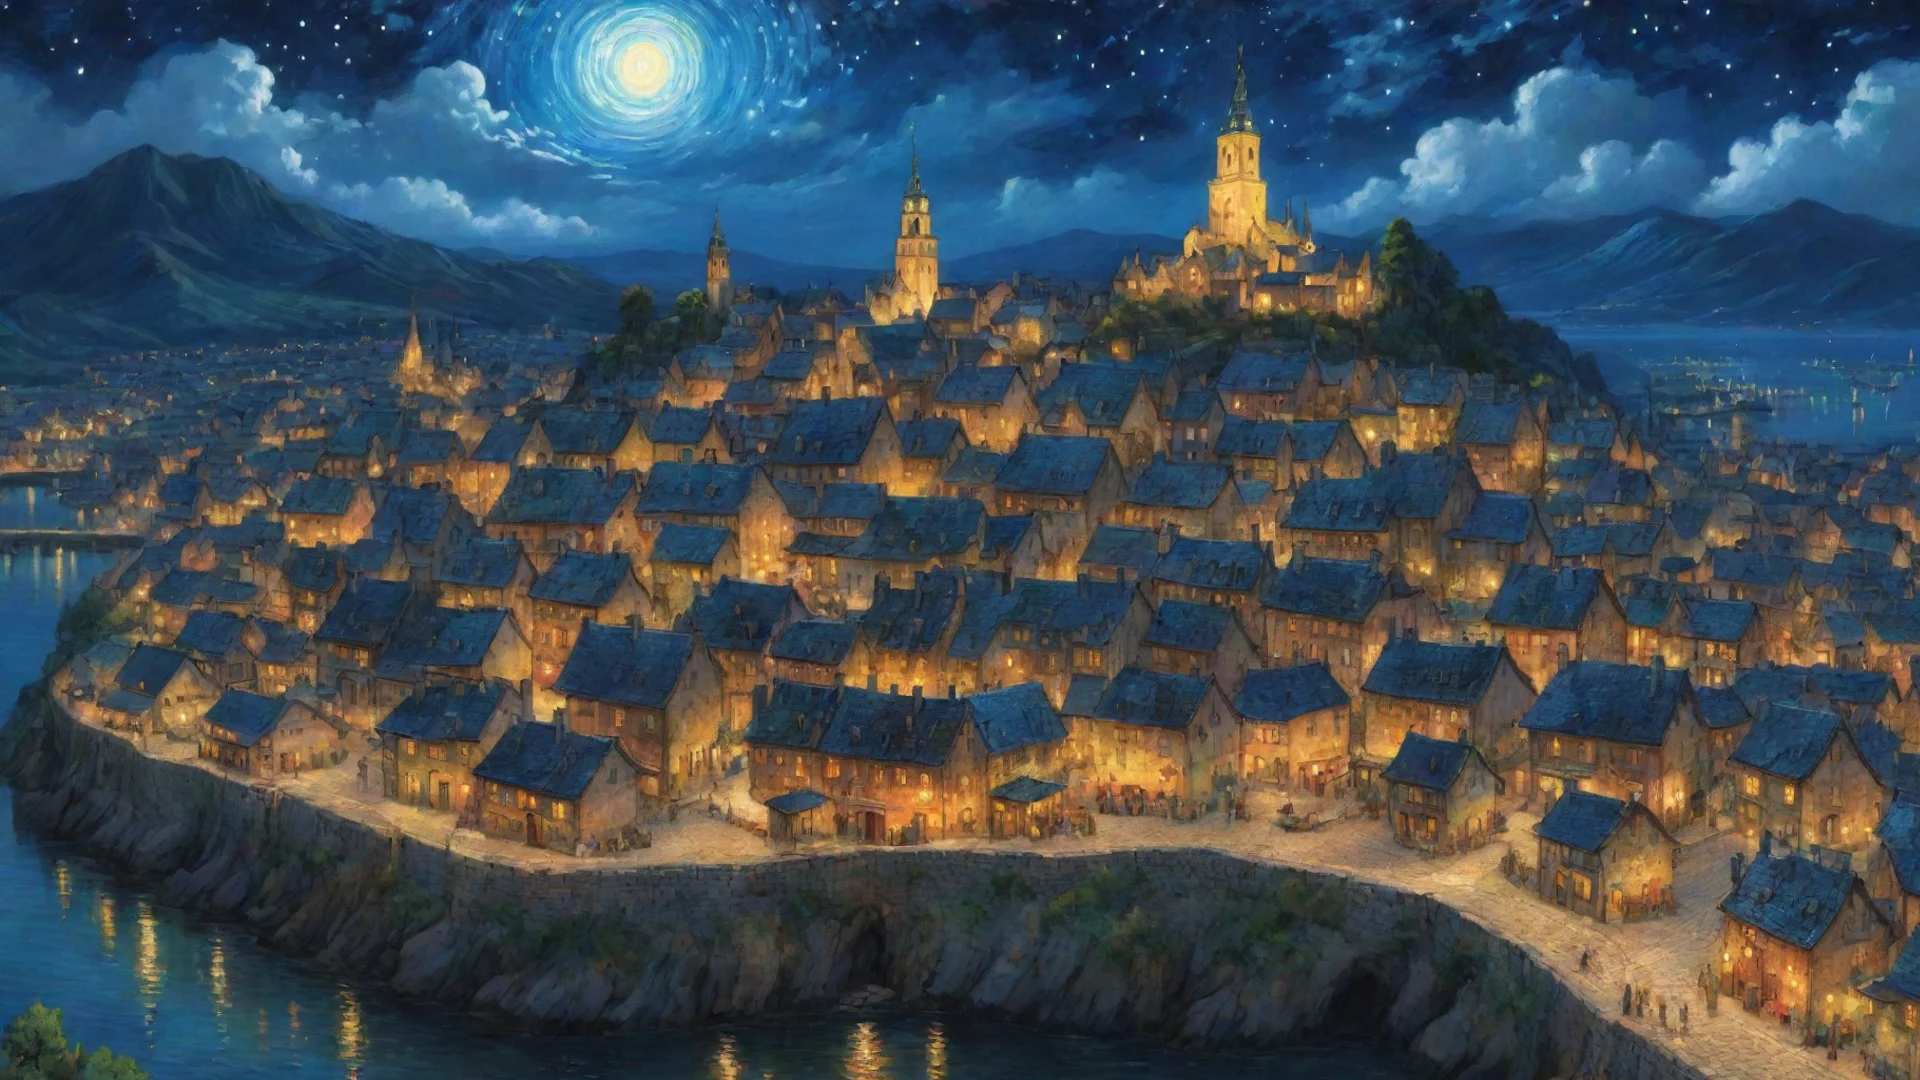 aiheavenly epic town lit up at night sky epic lovely artistic ghibli van gogh happyness bliss peace  detailed asthetic hd wow wide